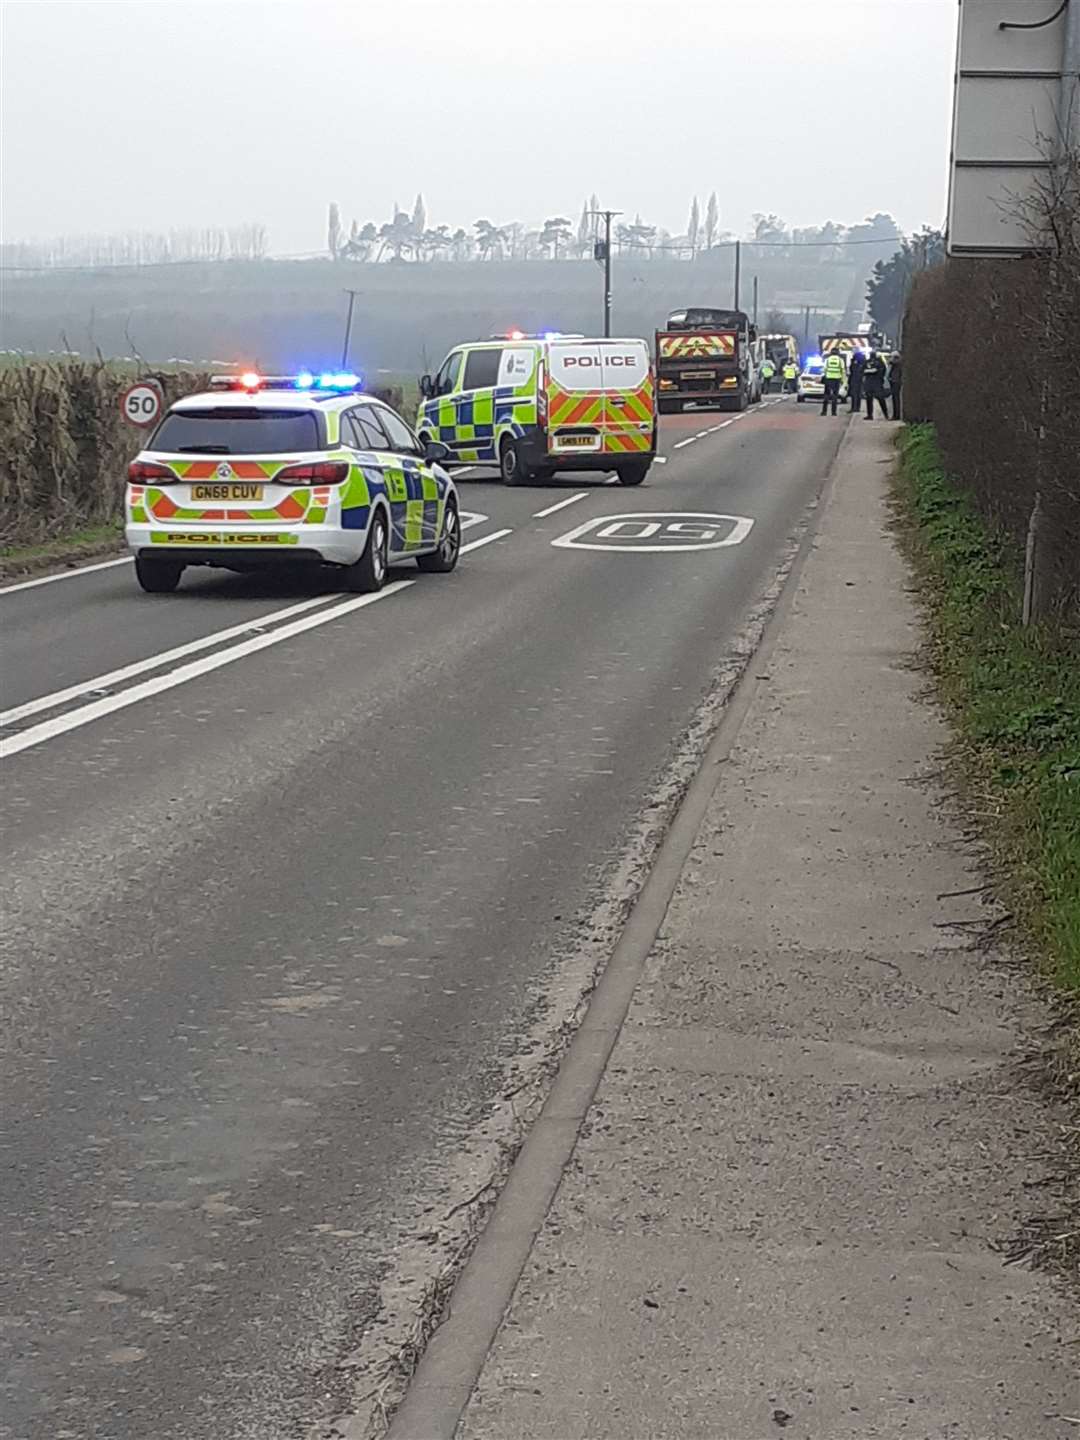 Police are at the scene on the A257